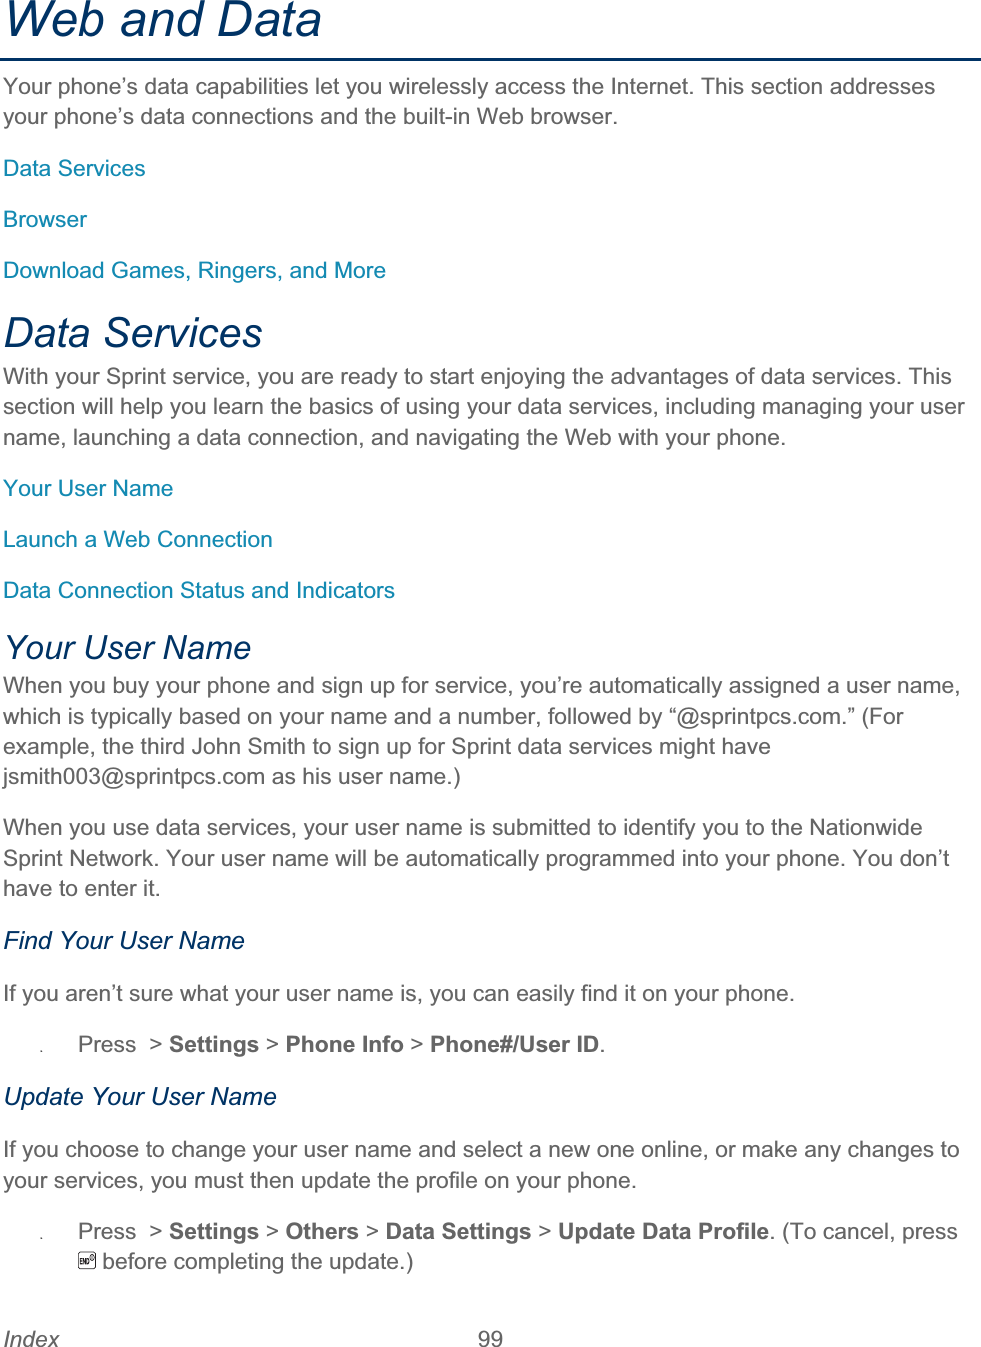 Index 99   Web and Data Your phone’s data capabilities let you wirelessly access the Internet. This section addresses your phone’s data connections and the built-in Web browser. Data Services BrowserDownload Games, Ringers, and More Data Services With your Sprint service, you are ready to start enjoying the advantages of data services. This section will help you learn the basics of using your data services, including managing your user name, launching a data connection, and navigating the Web with your phone. Your User Name Launch a Web Connection Data Connection Status and Indicators Your User Name When you buy your phone and sign up for service, you’re automatically assigned a user name, which is typically based on your name and a number, followed by “@sprintpcs.com.” (For example, the third John Smith to sign up for Sprint data services might have jsmith003@sprintpcs.com as his user name.) When you use data services, your user name is submitted to identify you to the Nationwide Sprint Network. Your user name will be automatically programmed into your phone. You don’t have to enter it. Find Your User Name If you aren’t sure what your user name is, you can easily find it on your phone. ʇPress  &gt; Settings &gt; Phone Info &gt; Phone#/User ID.Update Your User Name If you choose to change your user name and select a new one online, or make any changes to your services, you must then update the profile on your phone. ʇPress  &gt; Settings &gt; Others &gt; Data Settings &gt; Update Data Profile. (To cancel, press  before completing the update.) 